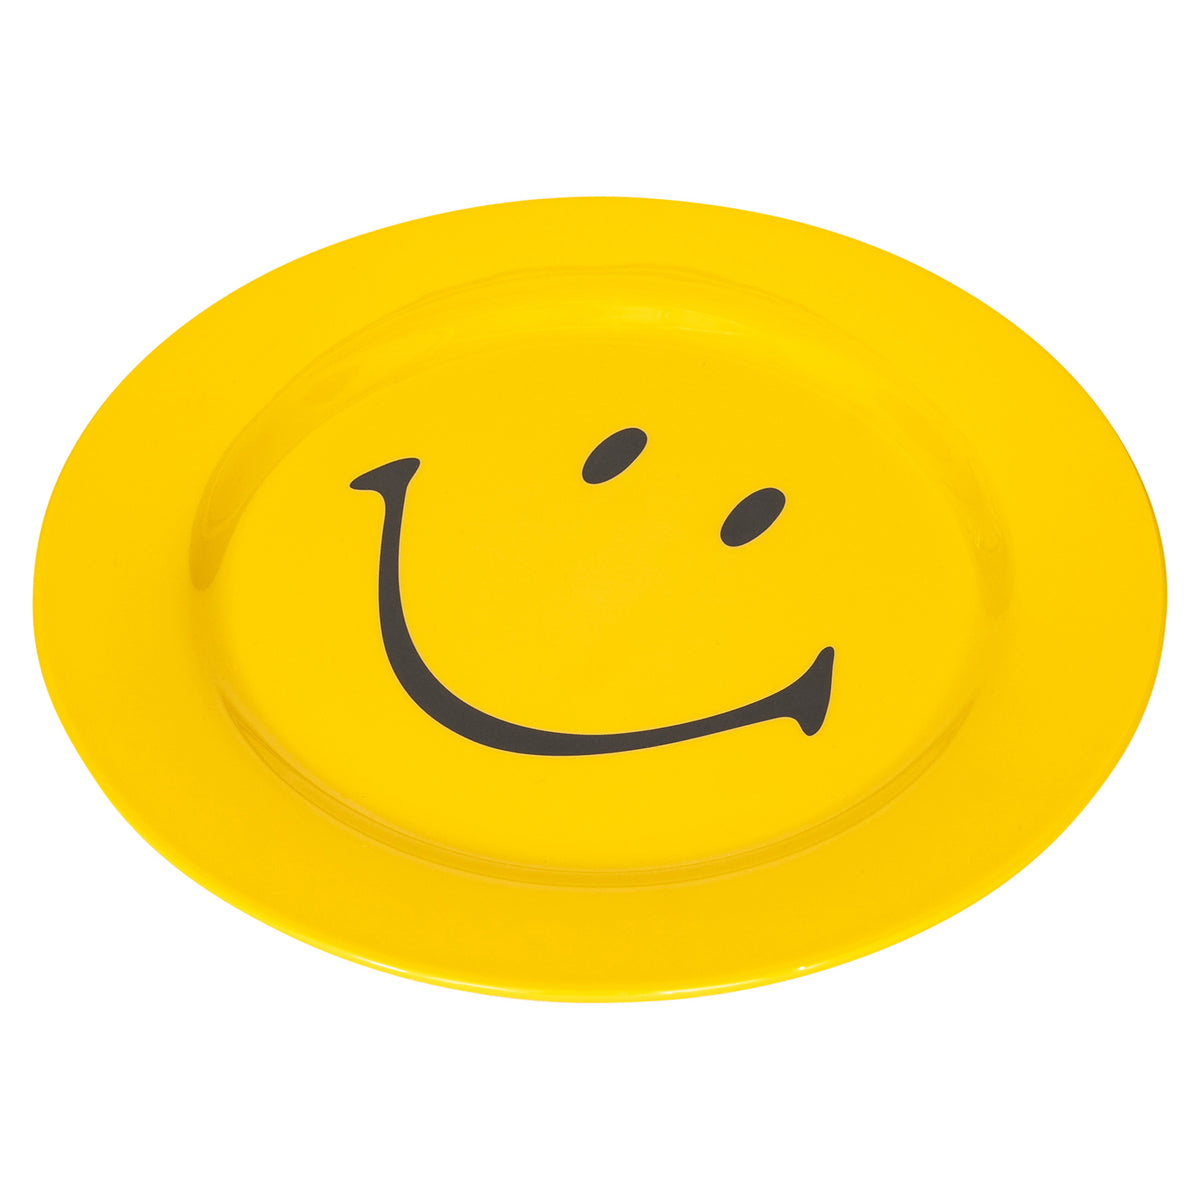 Load image into Gallery viewer, MARKET Yellow 4 Smiley Plates Set
